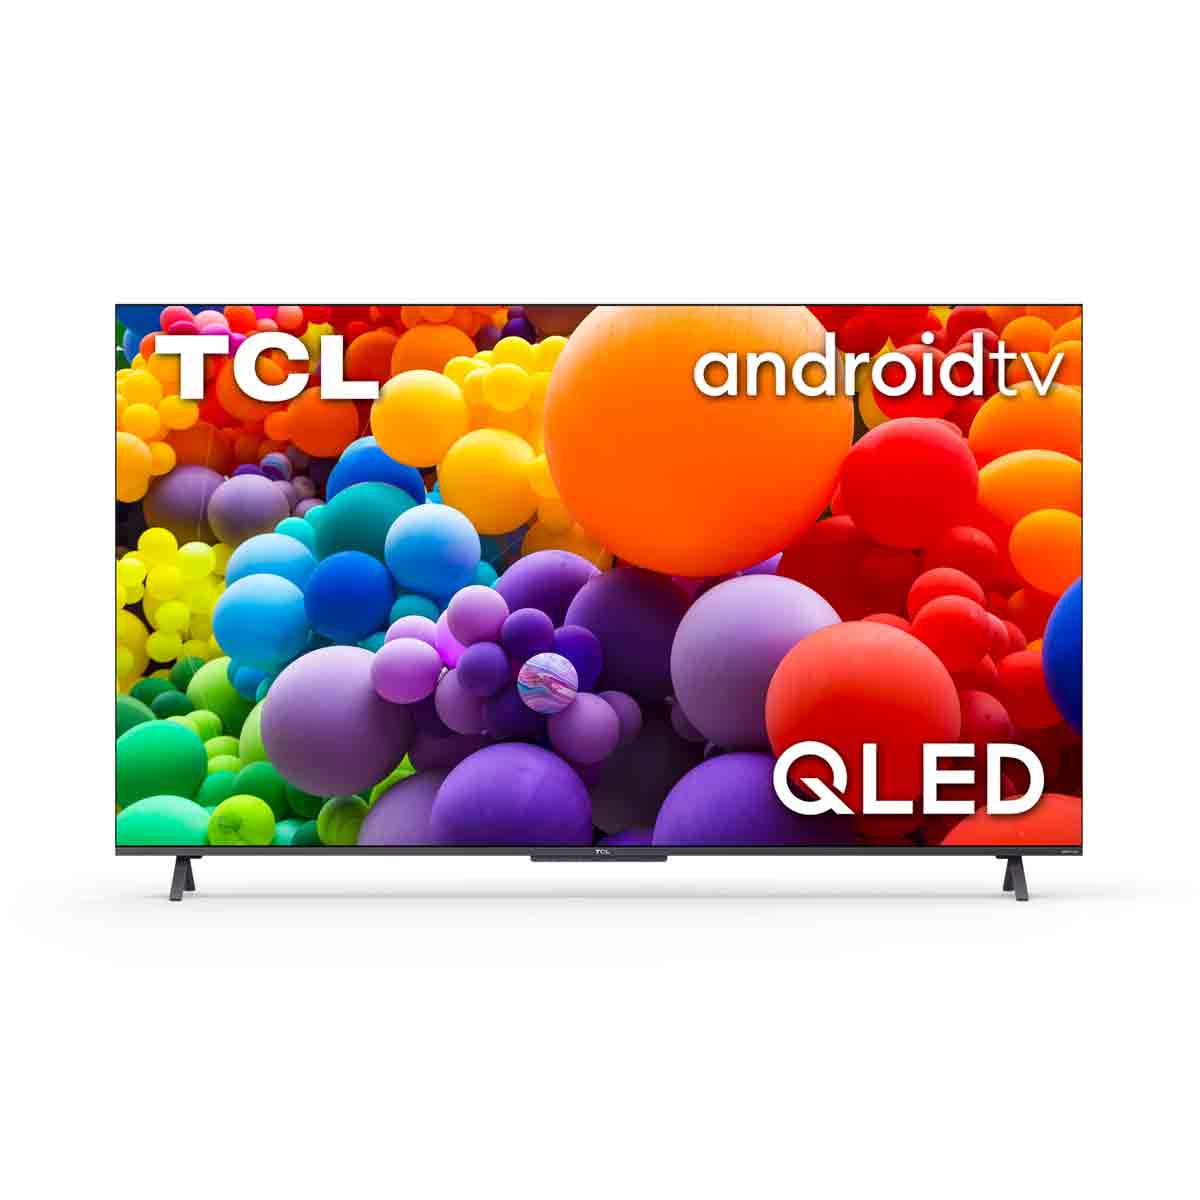 TCL 43C725K QLED Smart Android TV